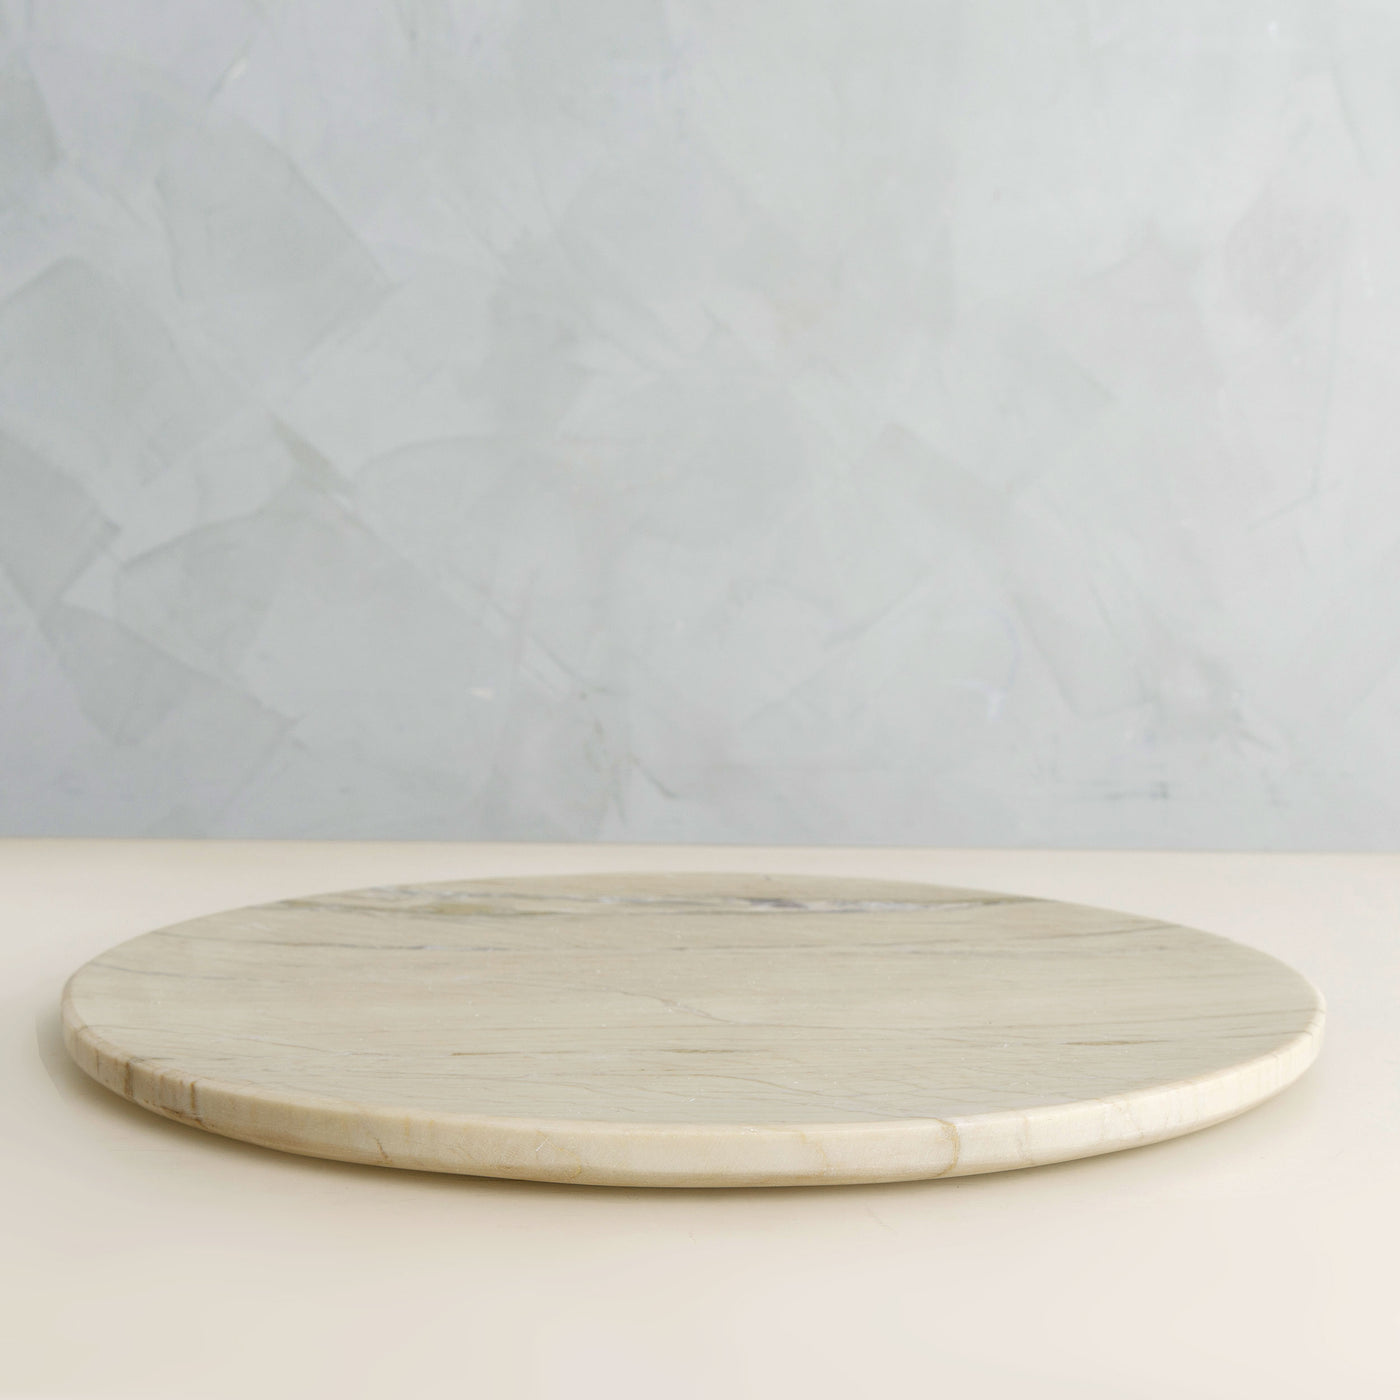 FLECK Pista coloured Marble Serving Platter with unique white veining 